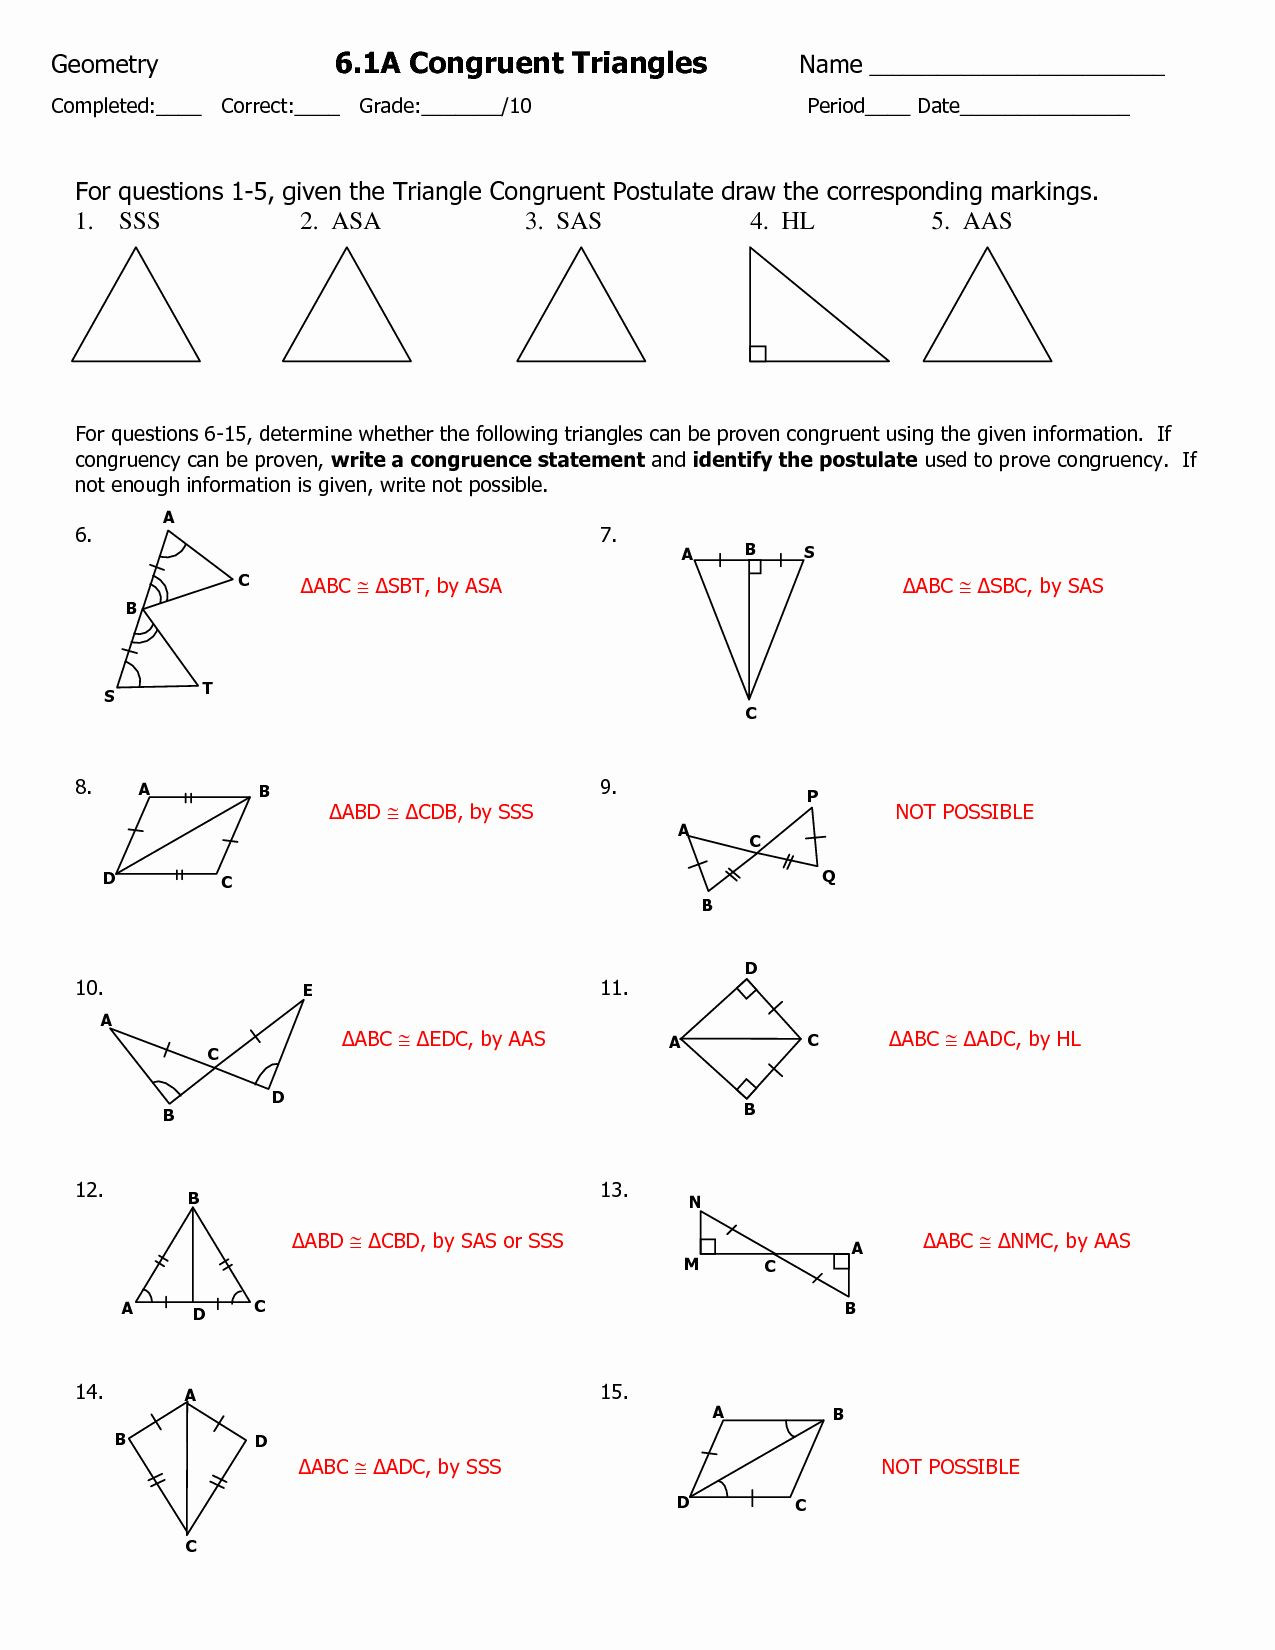 Congruent Triangles Worksheet Answers 50 Congruent Triangles Worksheet with Answer In 2020 with